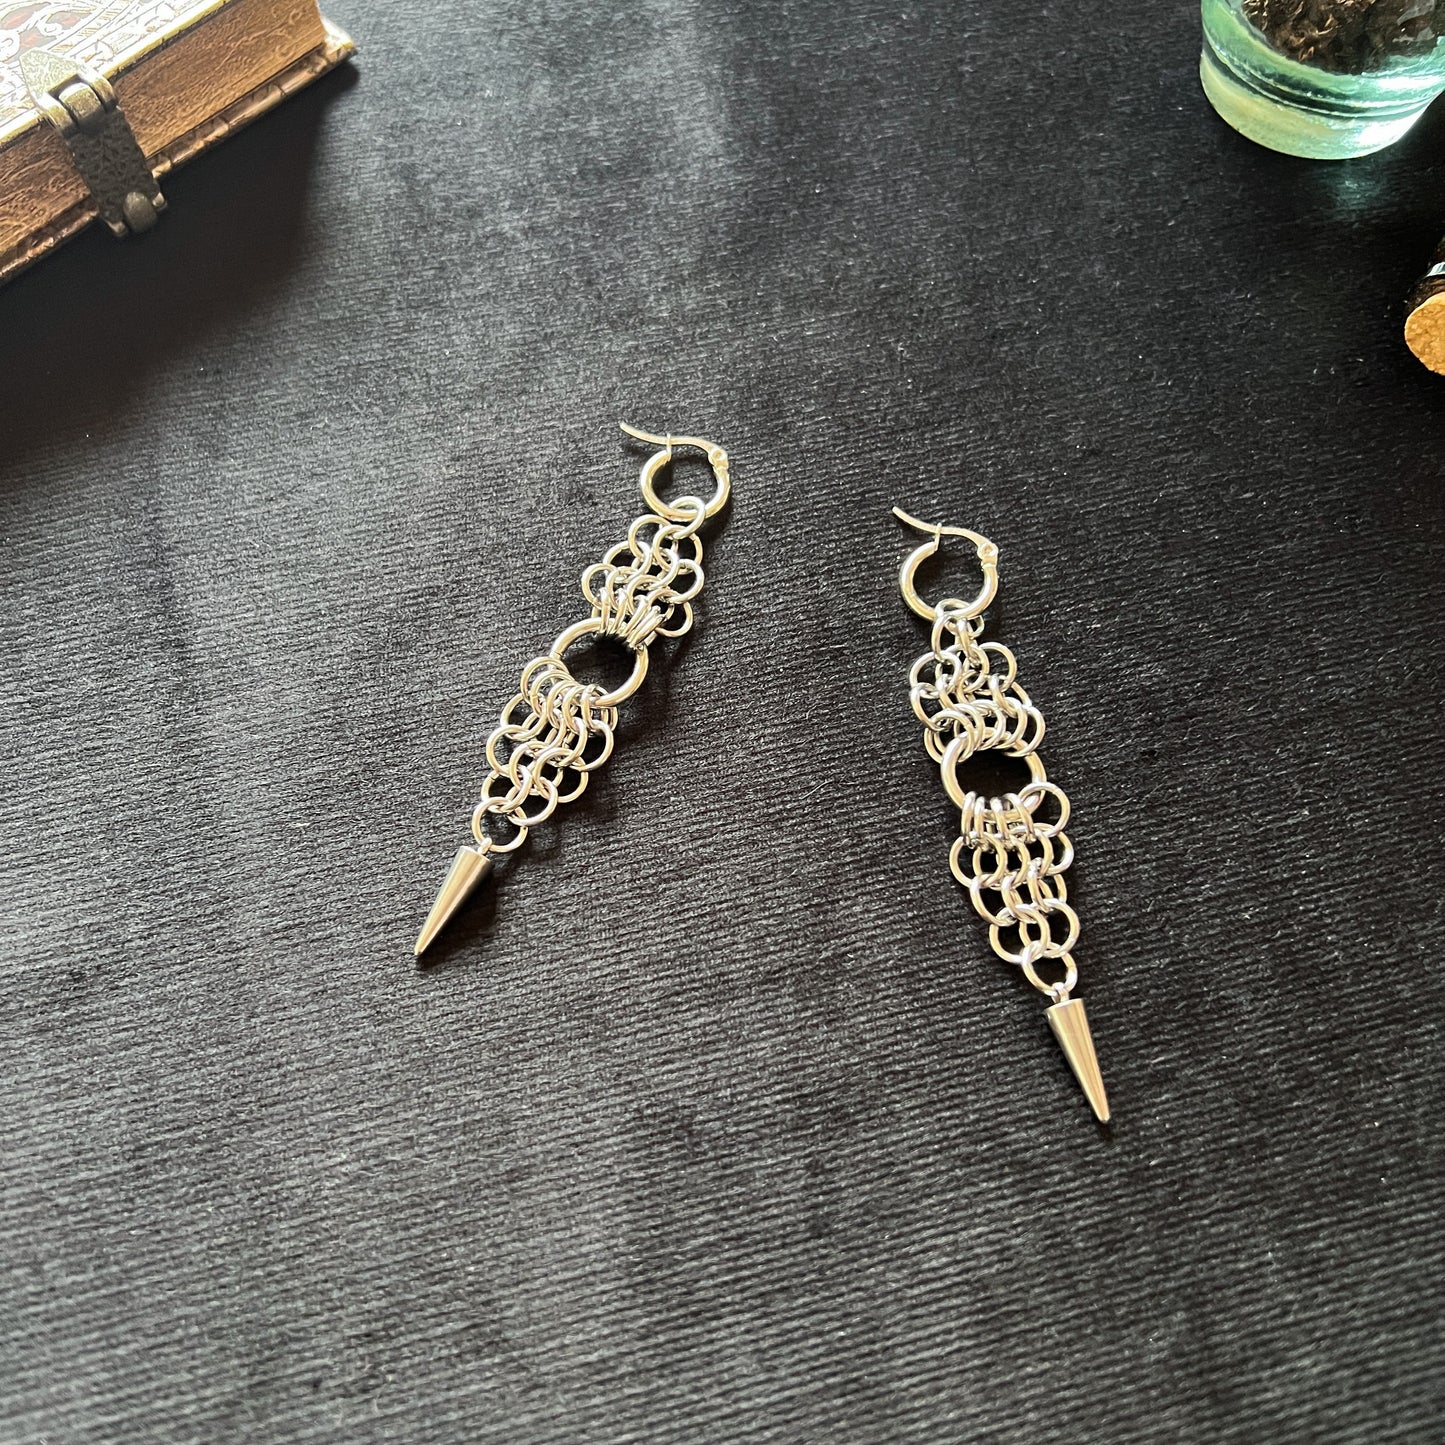 European 4 in 1 chainmail earrings made of stainless steel Baguette Magick